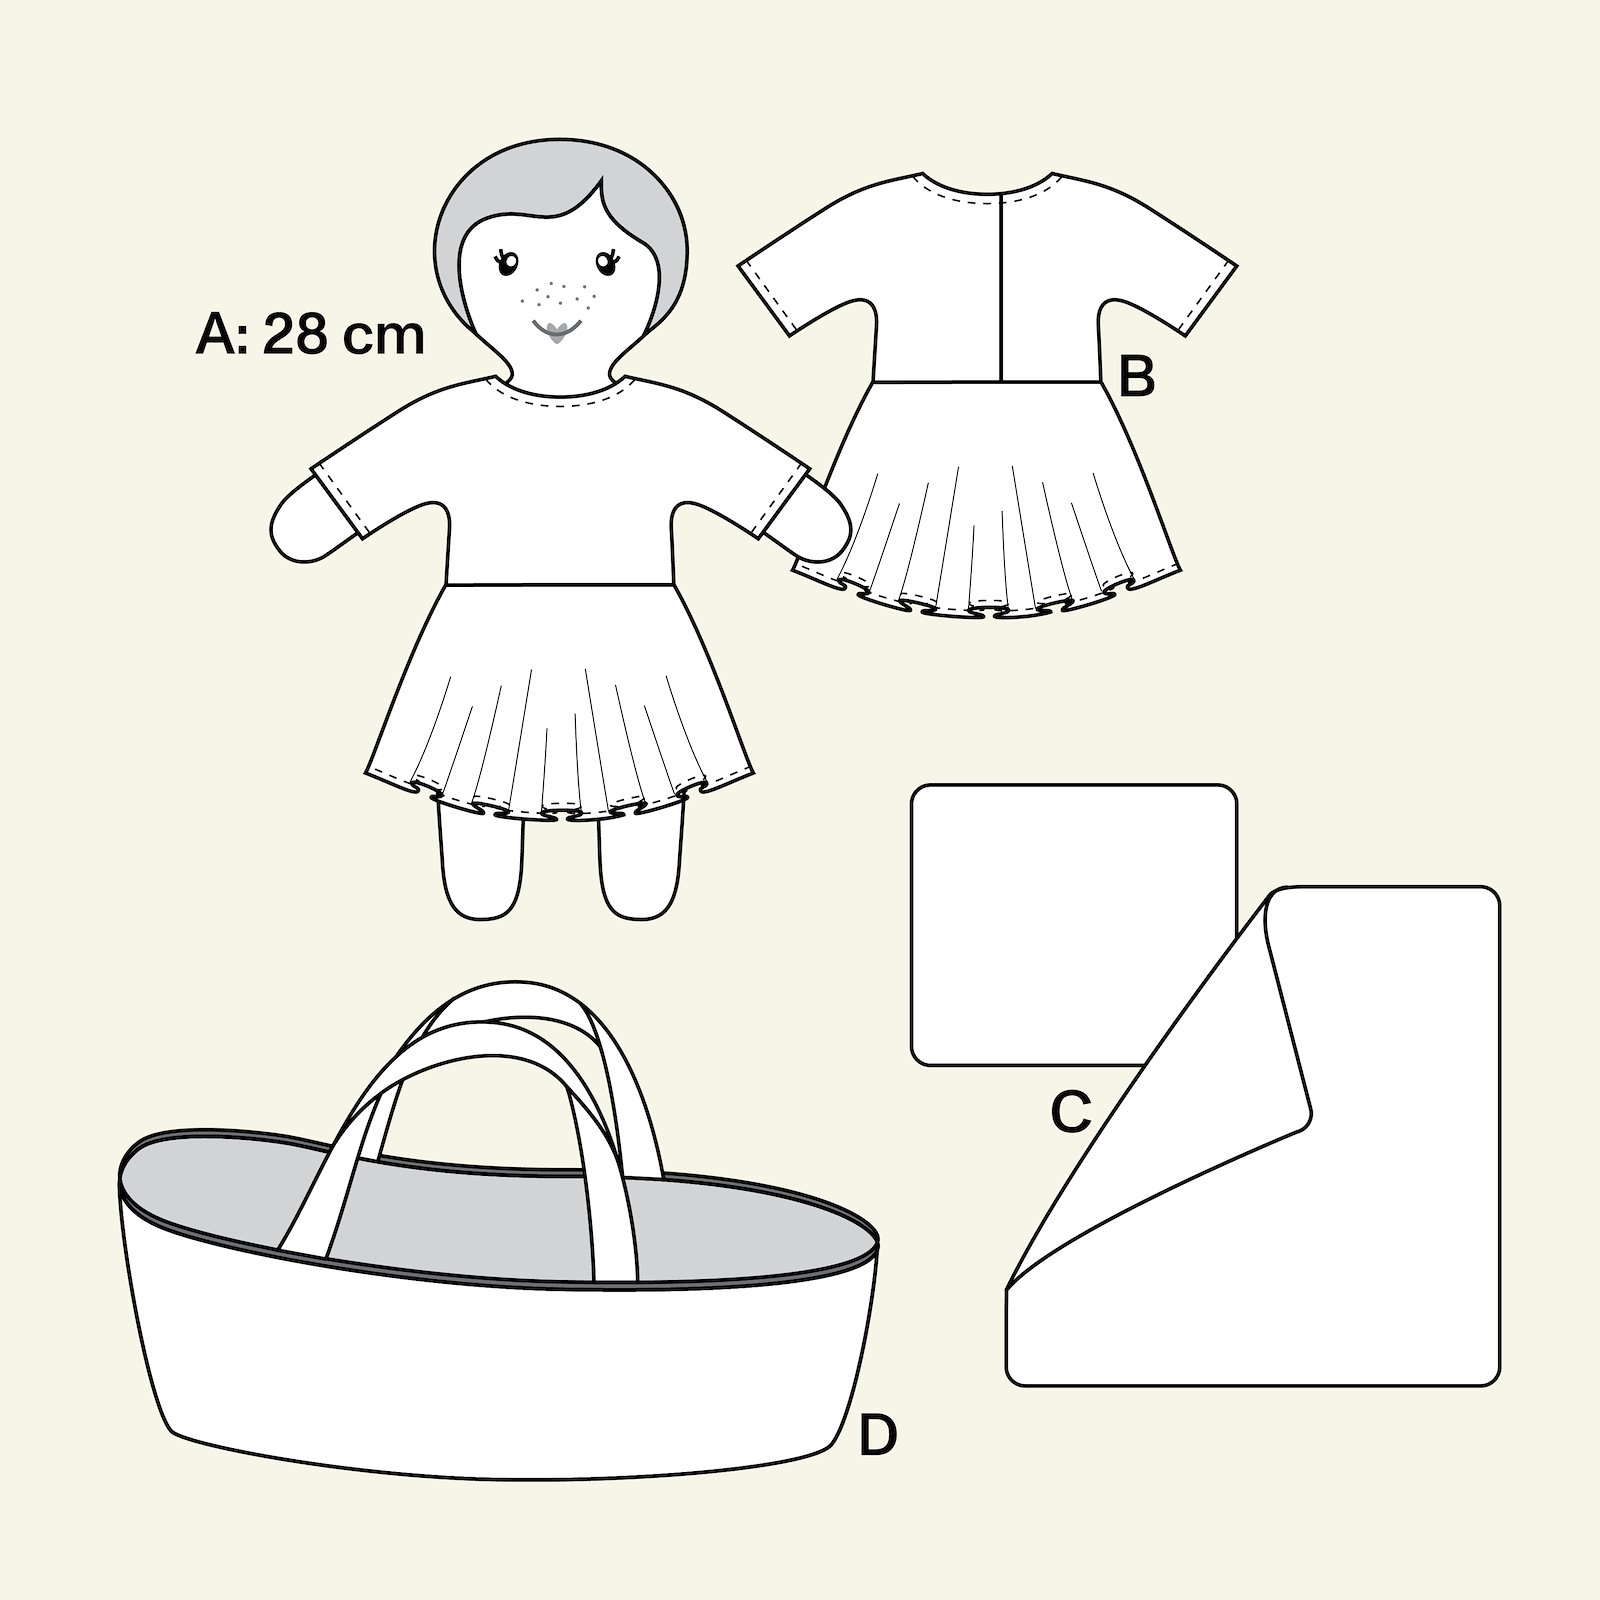 Mini doll with clothes and carrycot p90326_pack